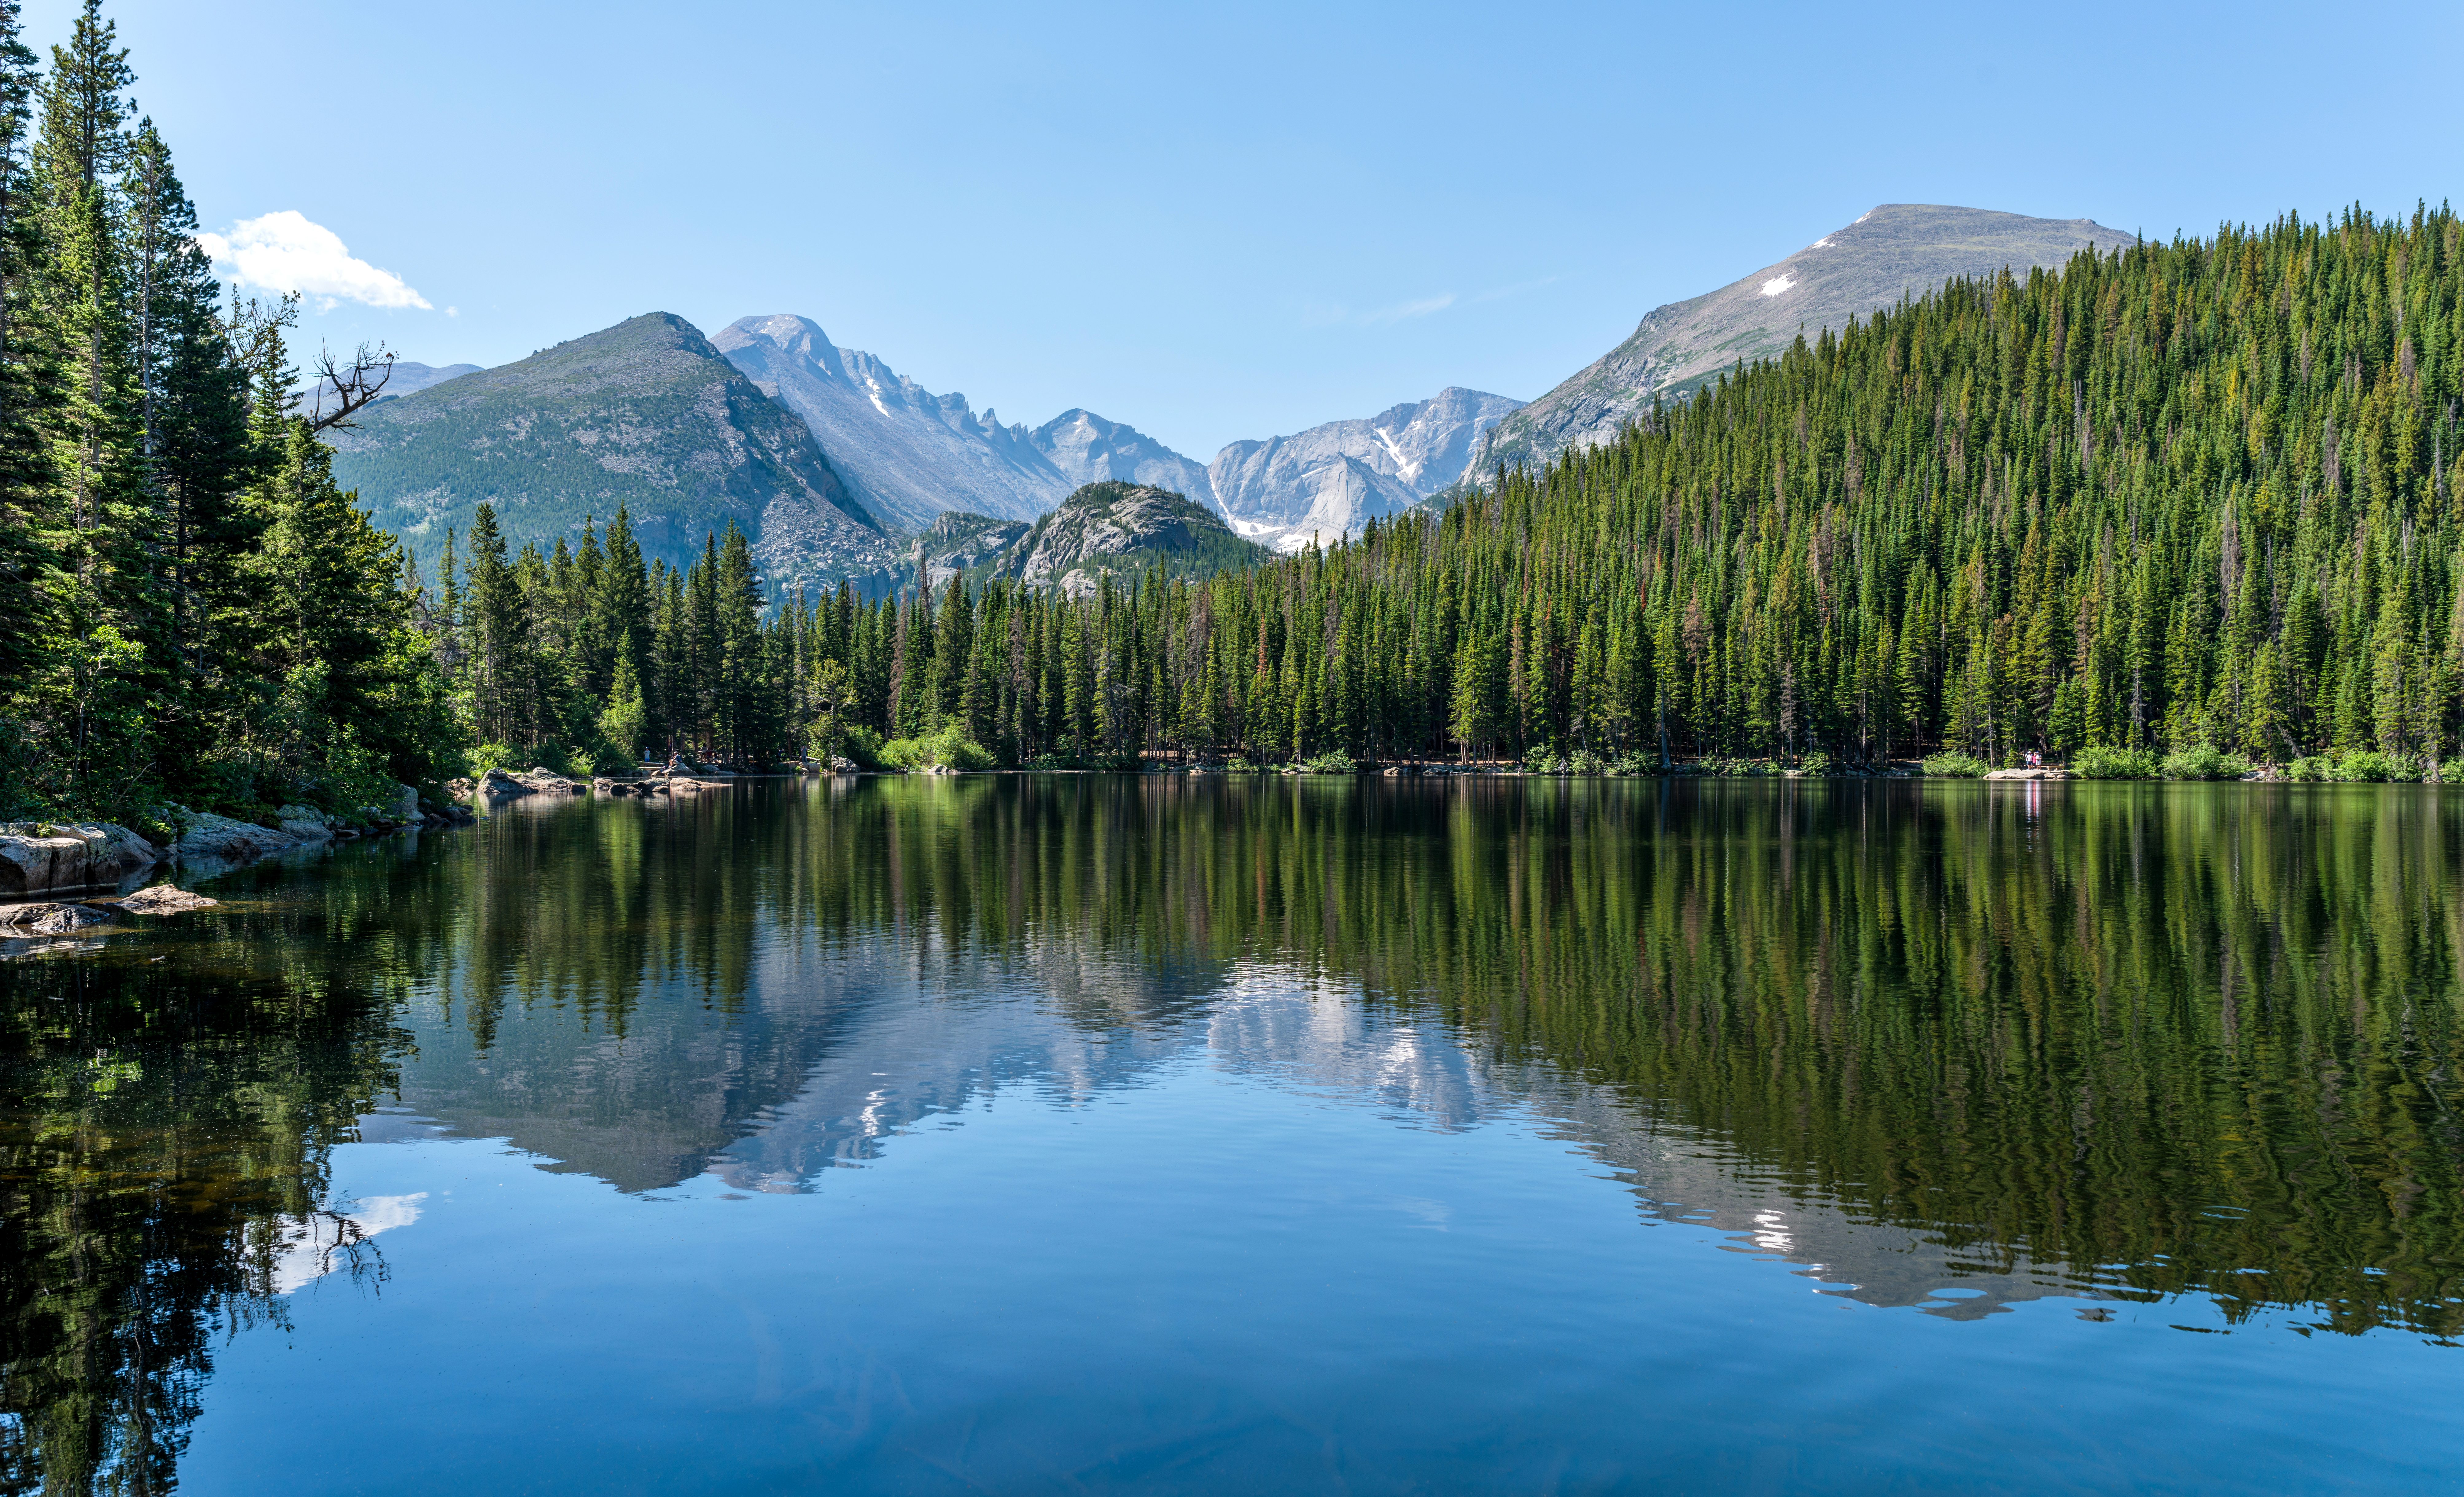 Image of a lake with mountain background